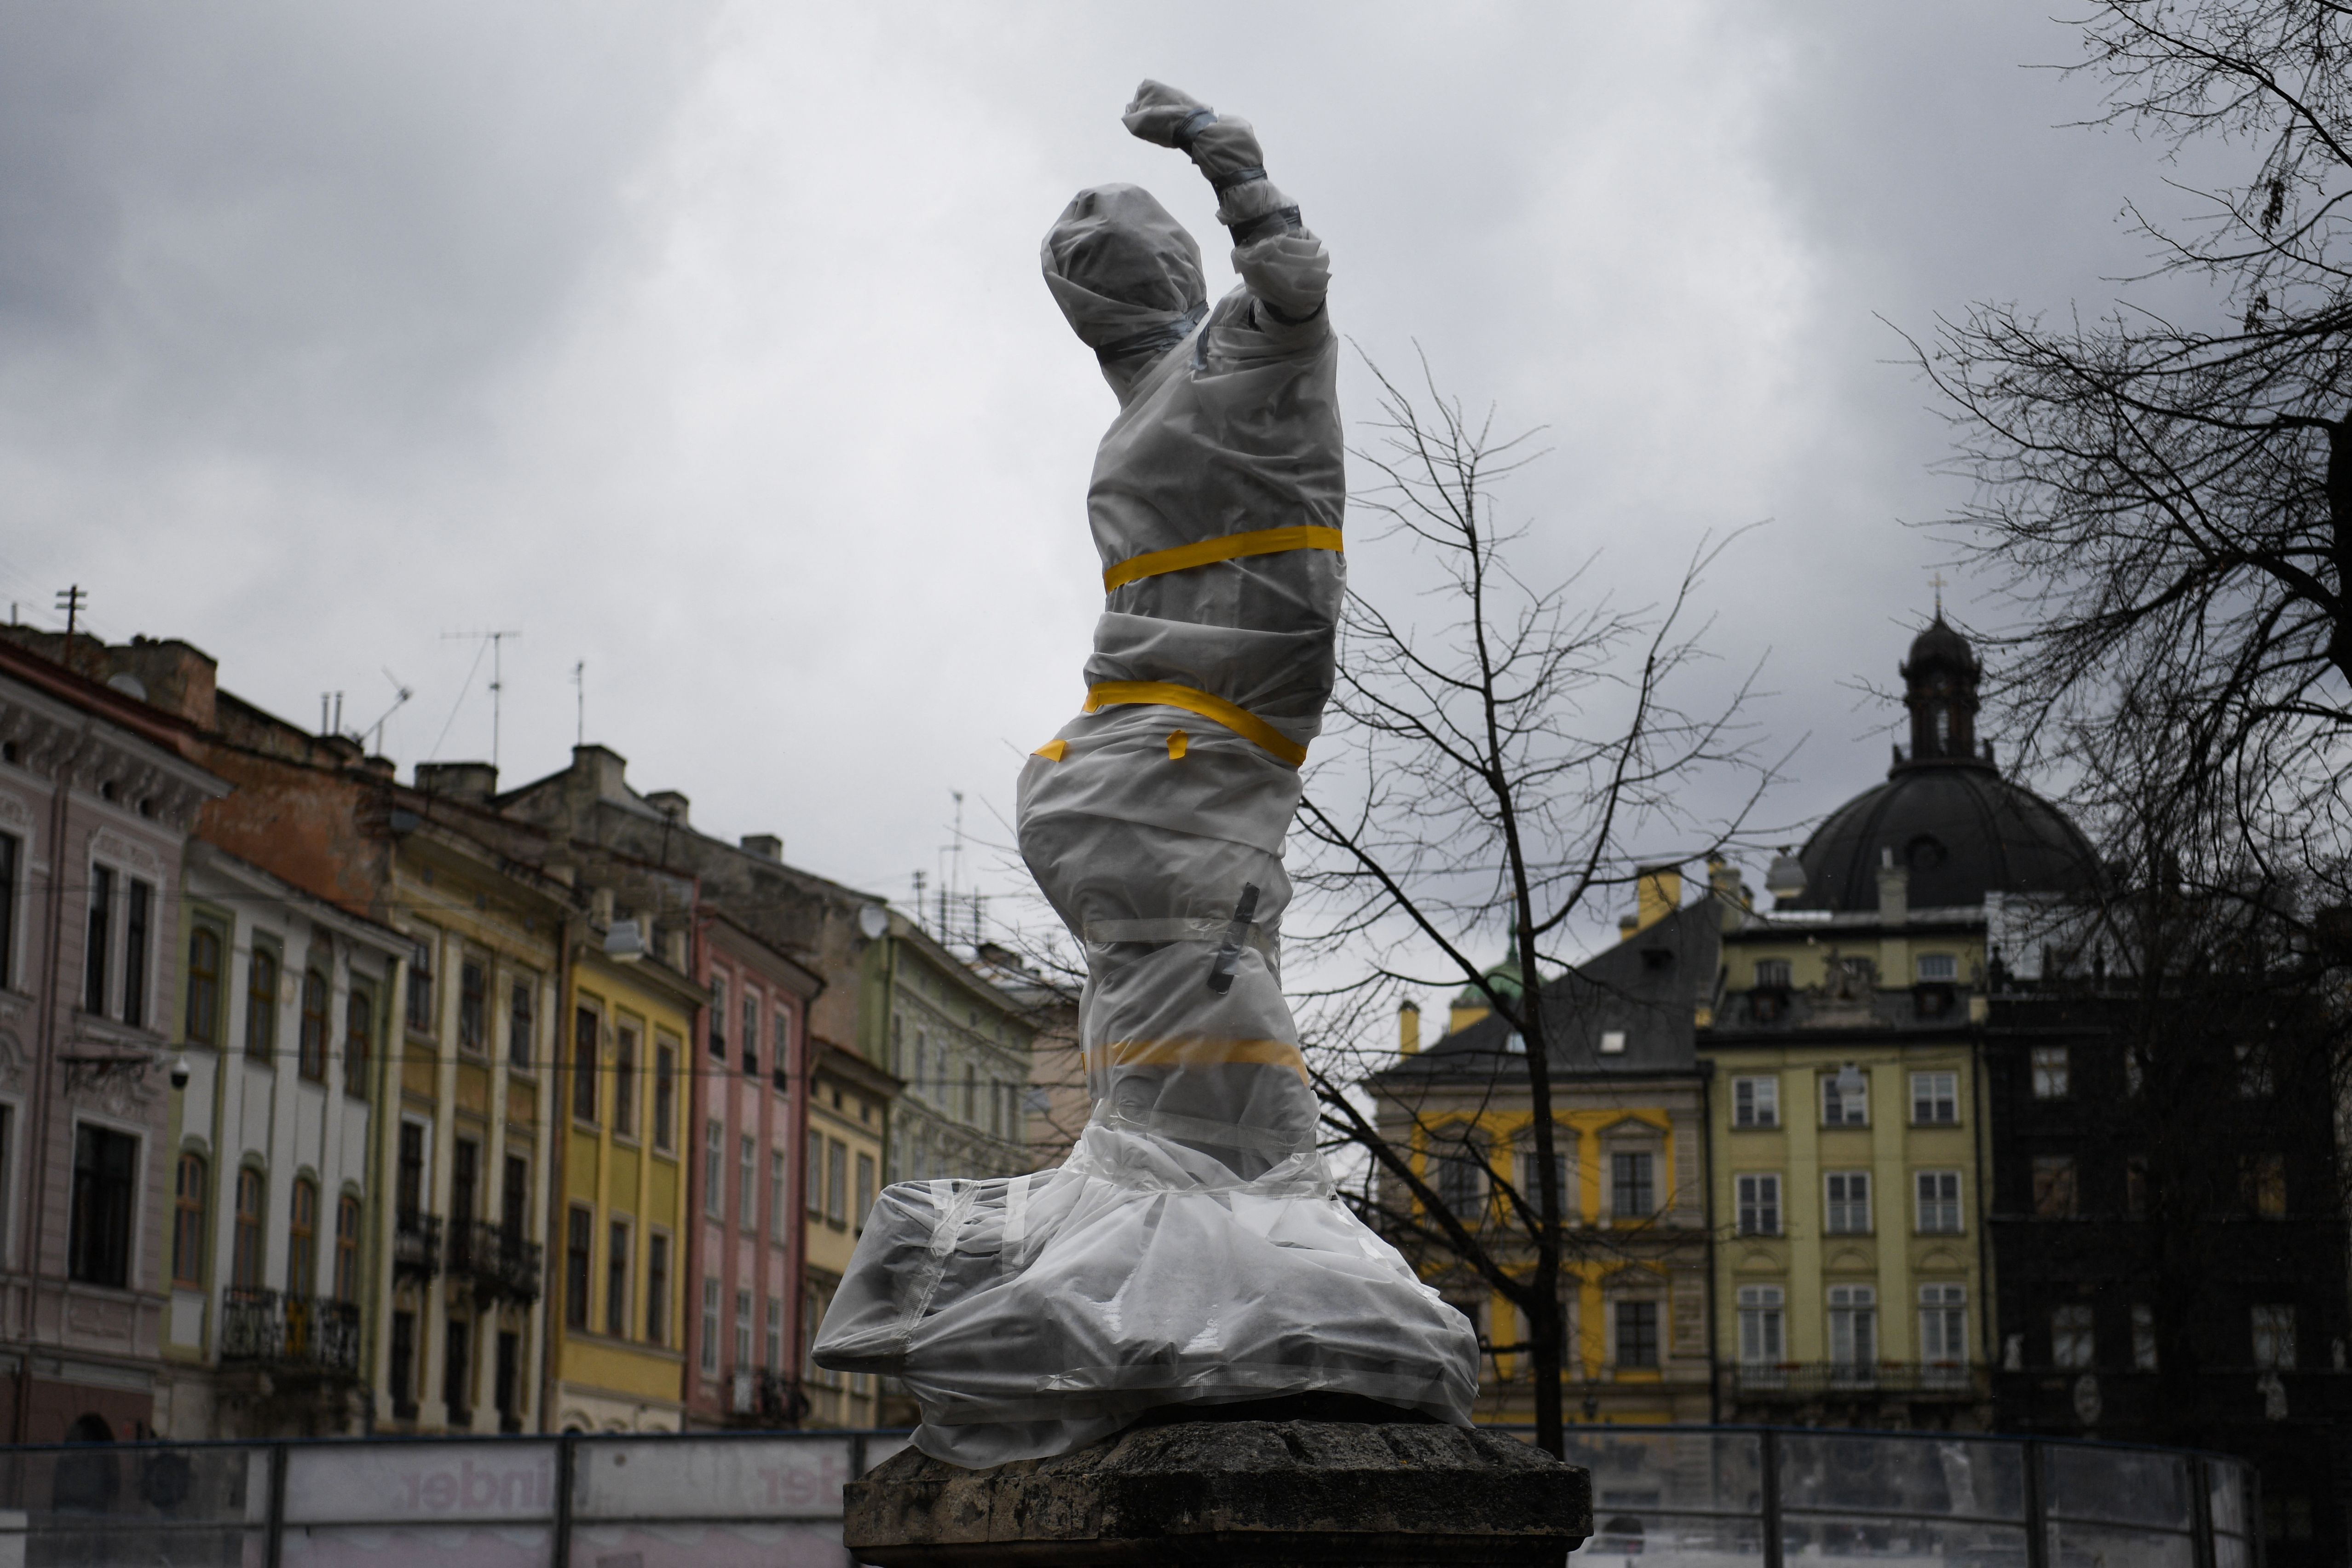 A wrapped statue.